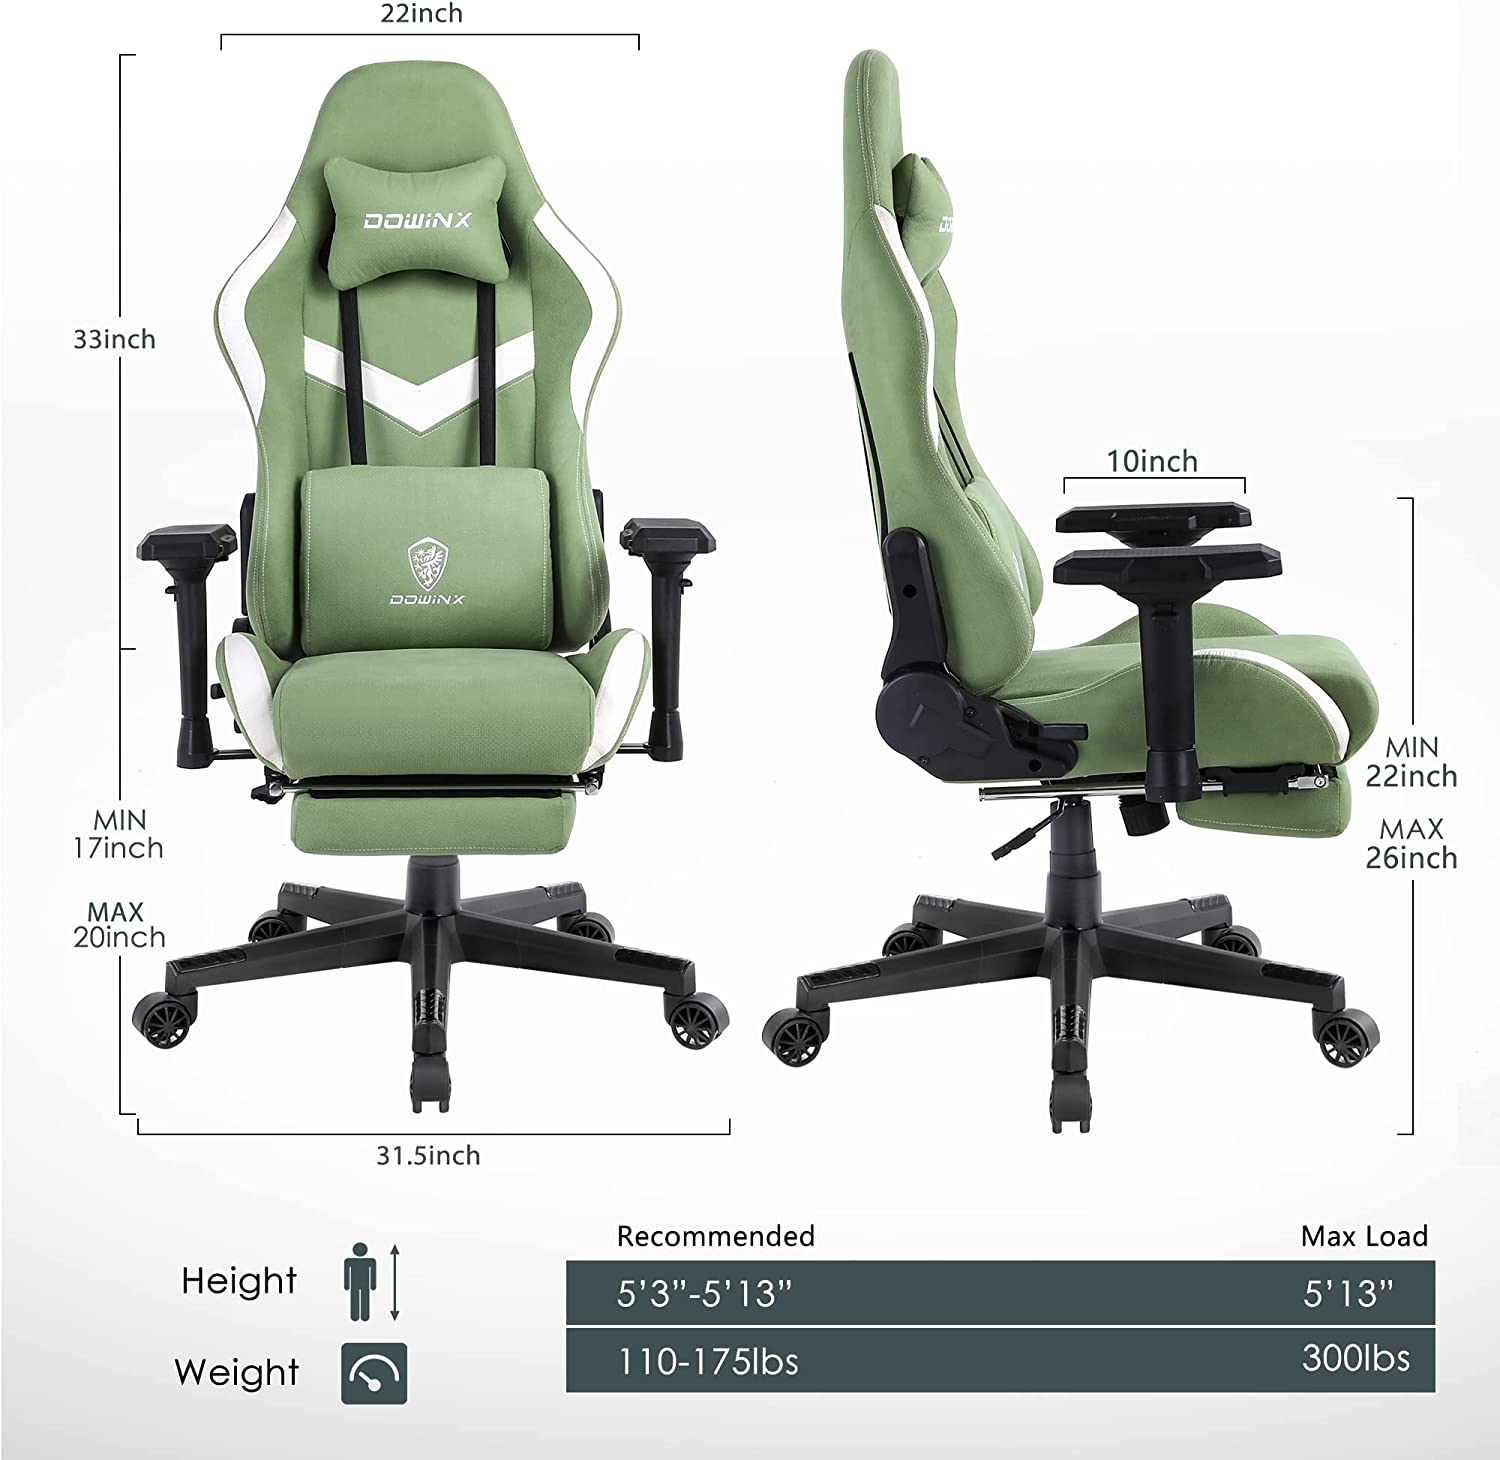 Dowinx Gaming Chair LS-666806-4D